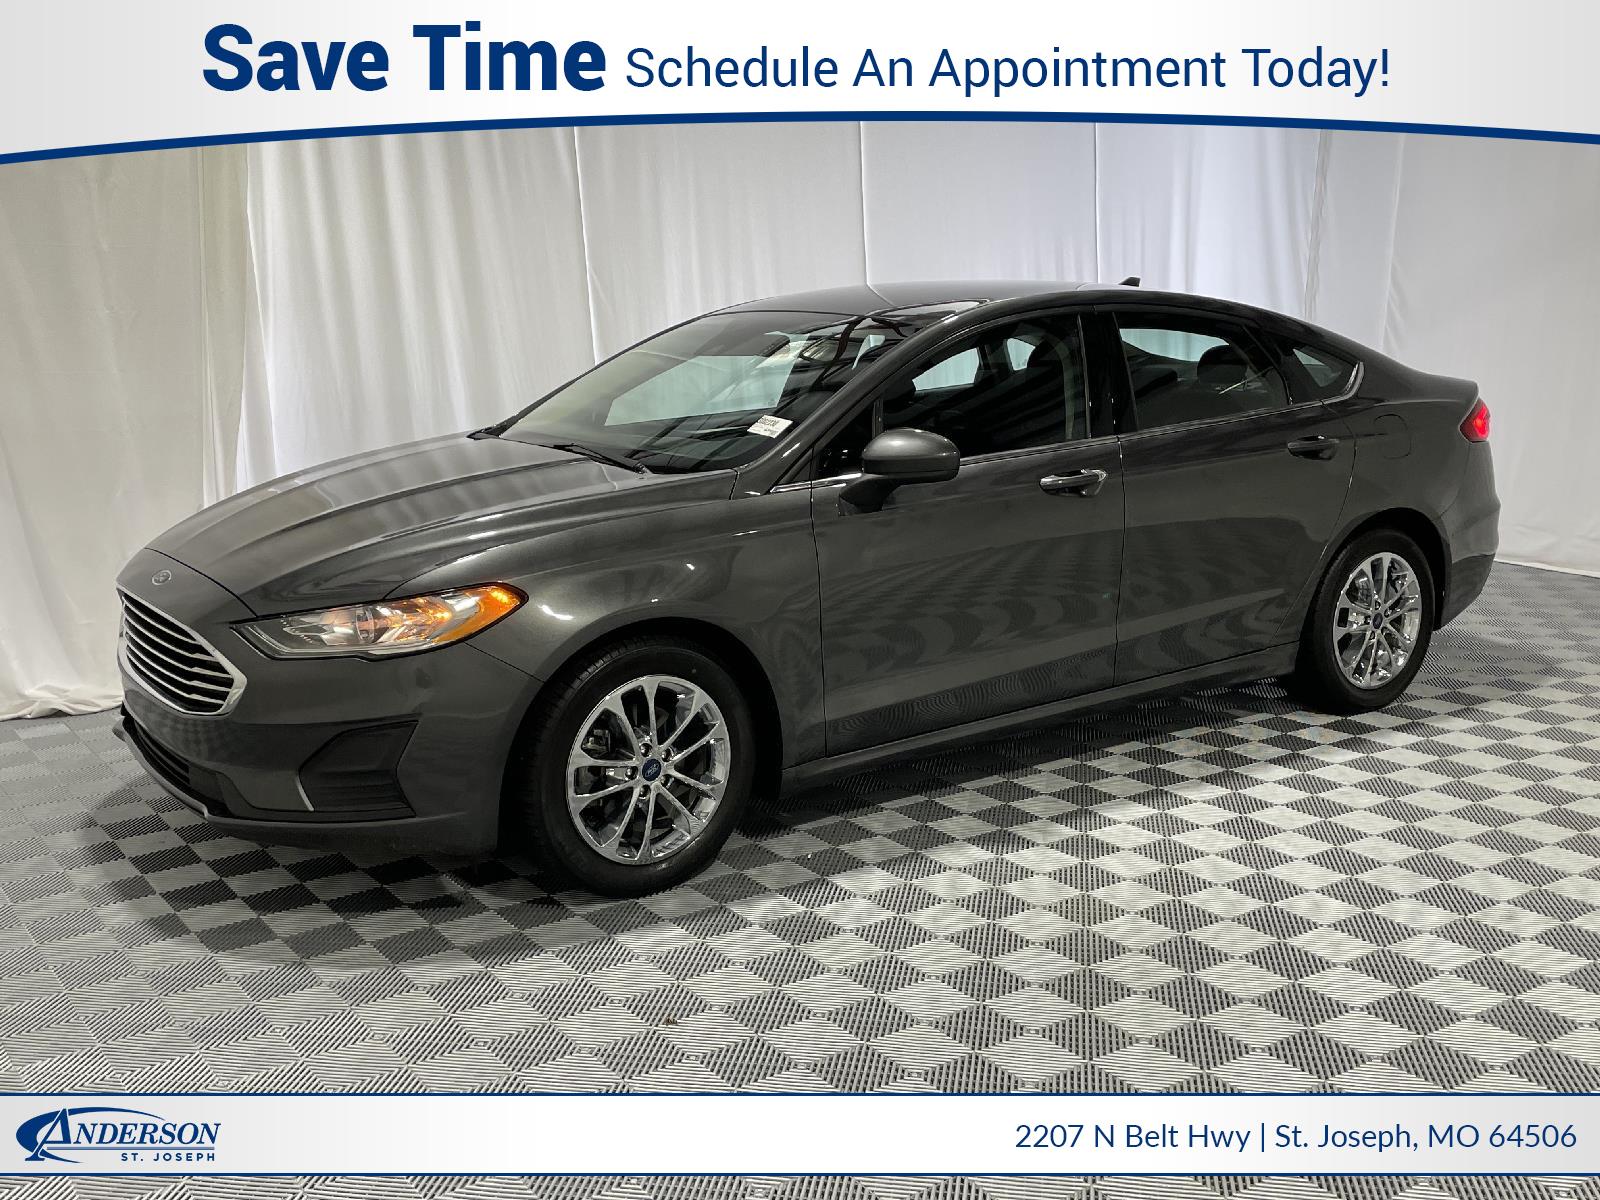 Used 2020 Ford Fusion SE Stock: 3002230